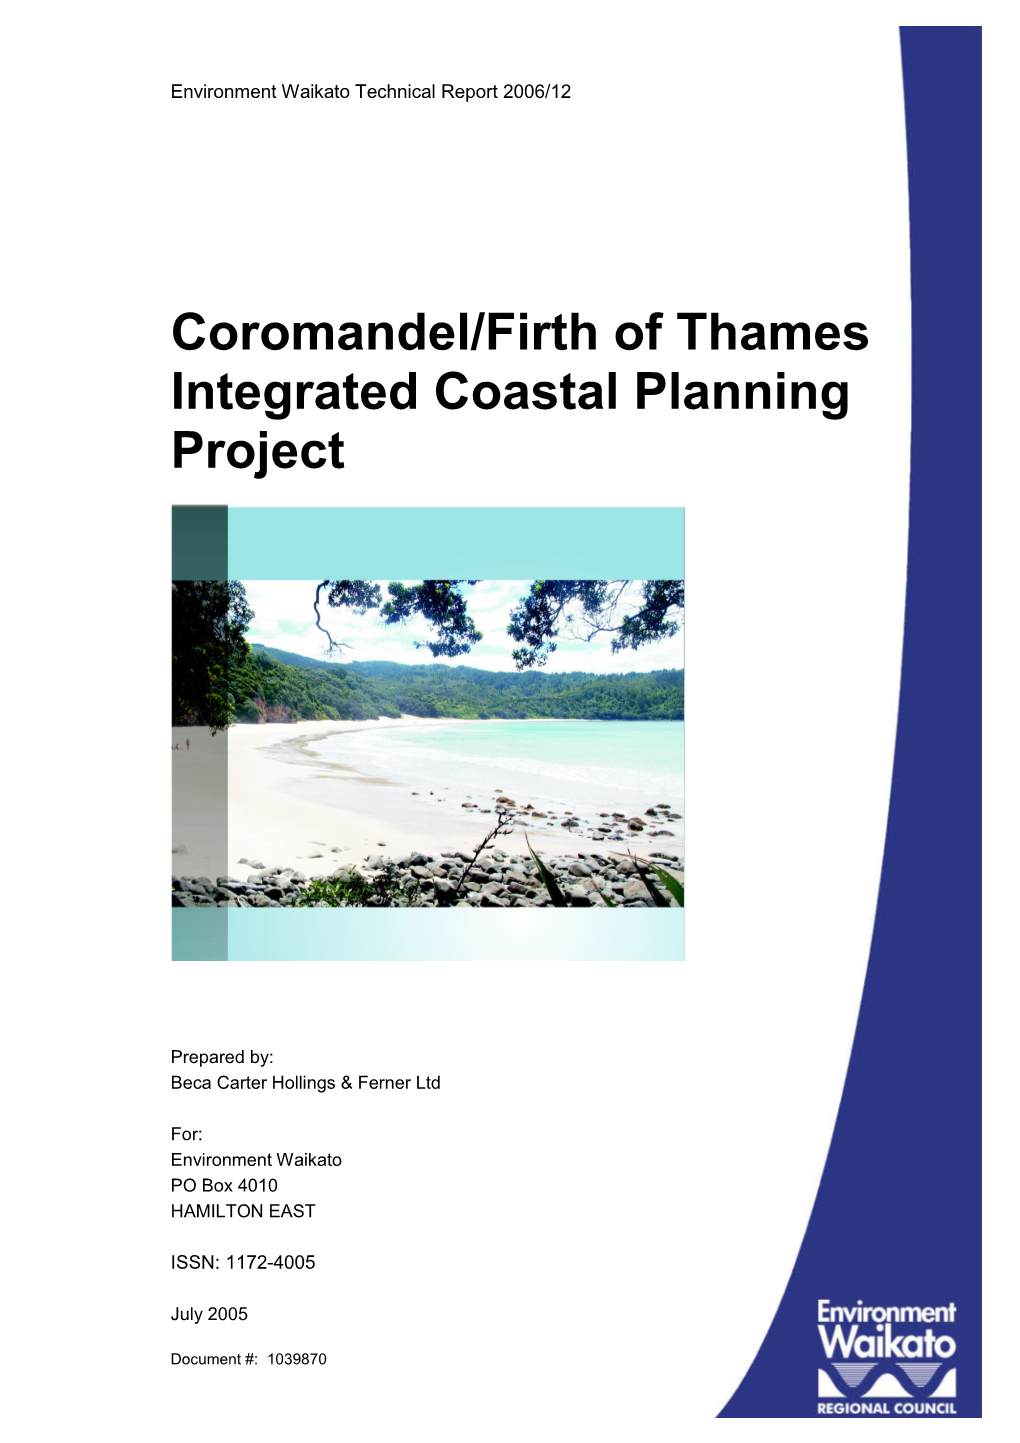 Coromandel/Firth of Thames Integrated Coastal Planning Project